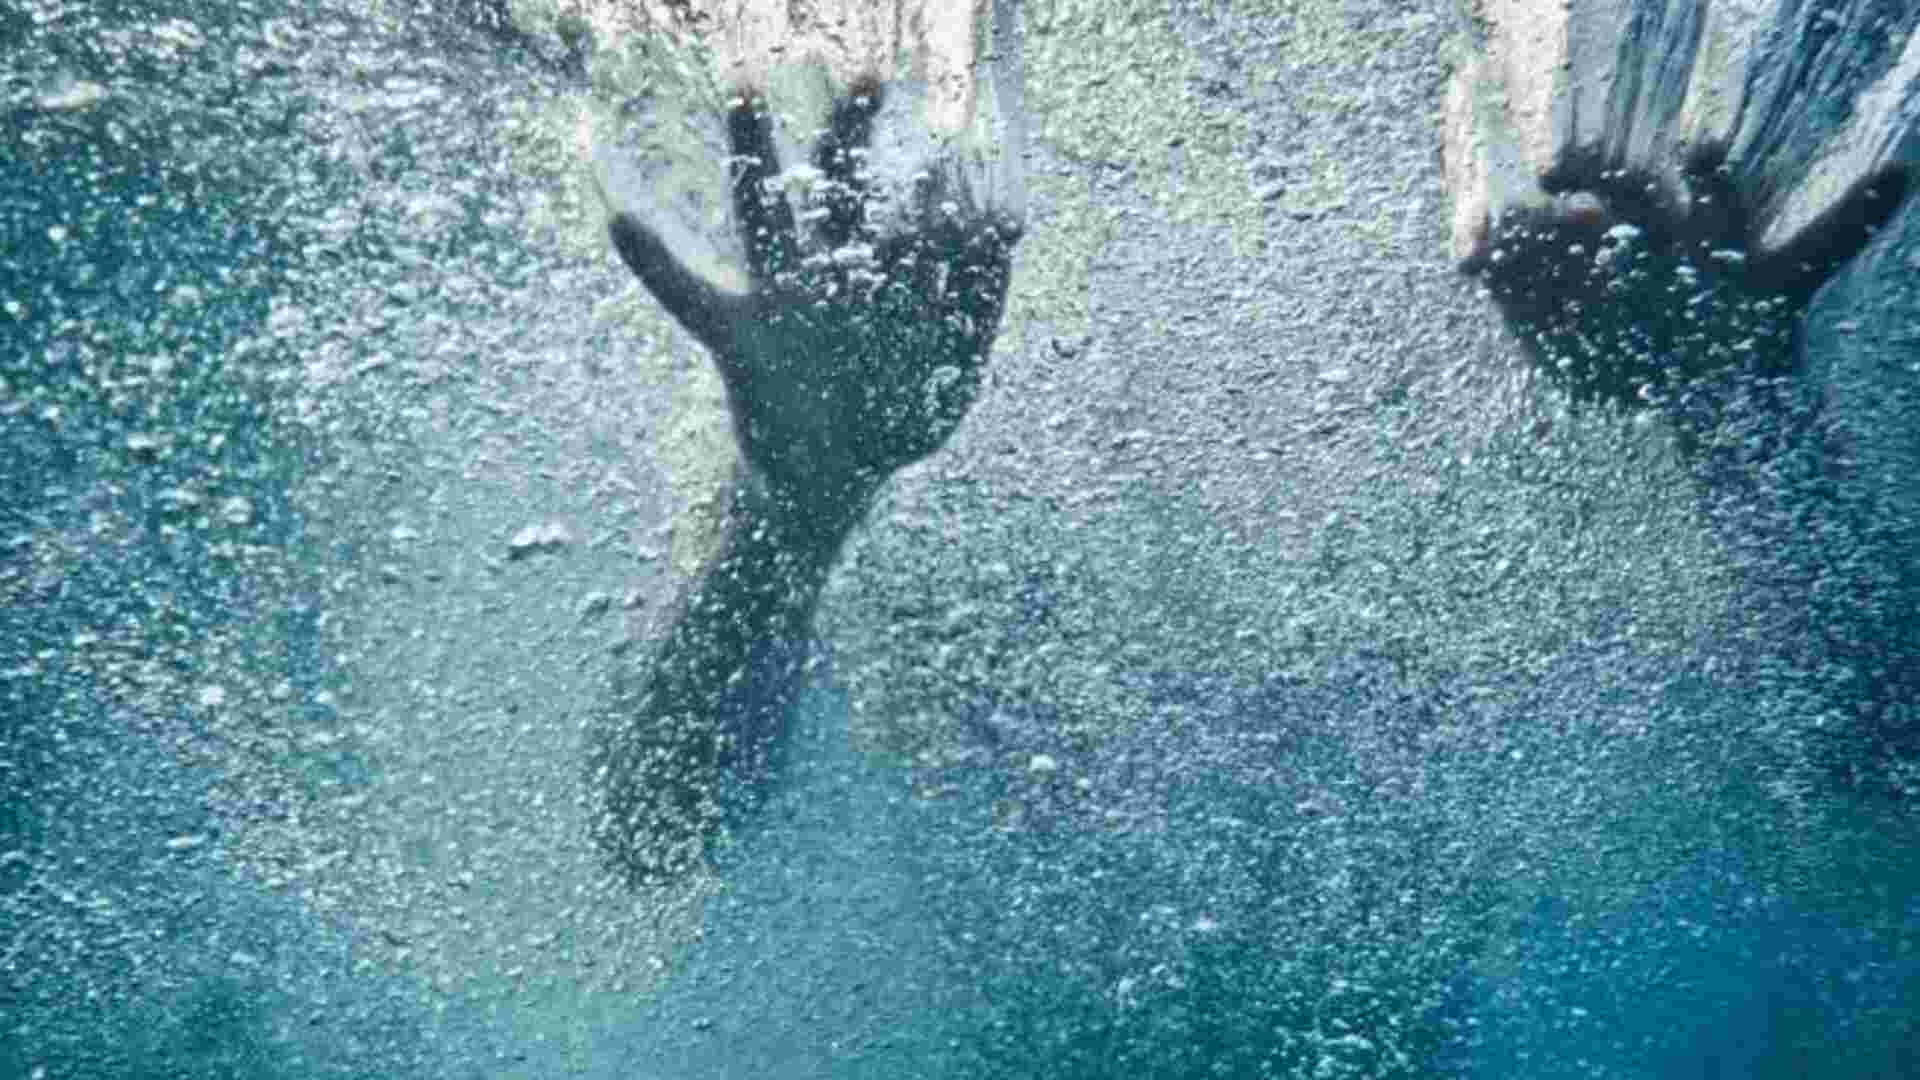 Jharkhand Teen Attempts 100 ft. Dive Into Lake To Make Instagram Reel, Dies